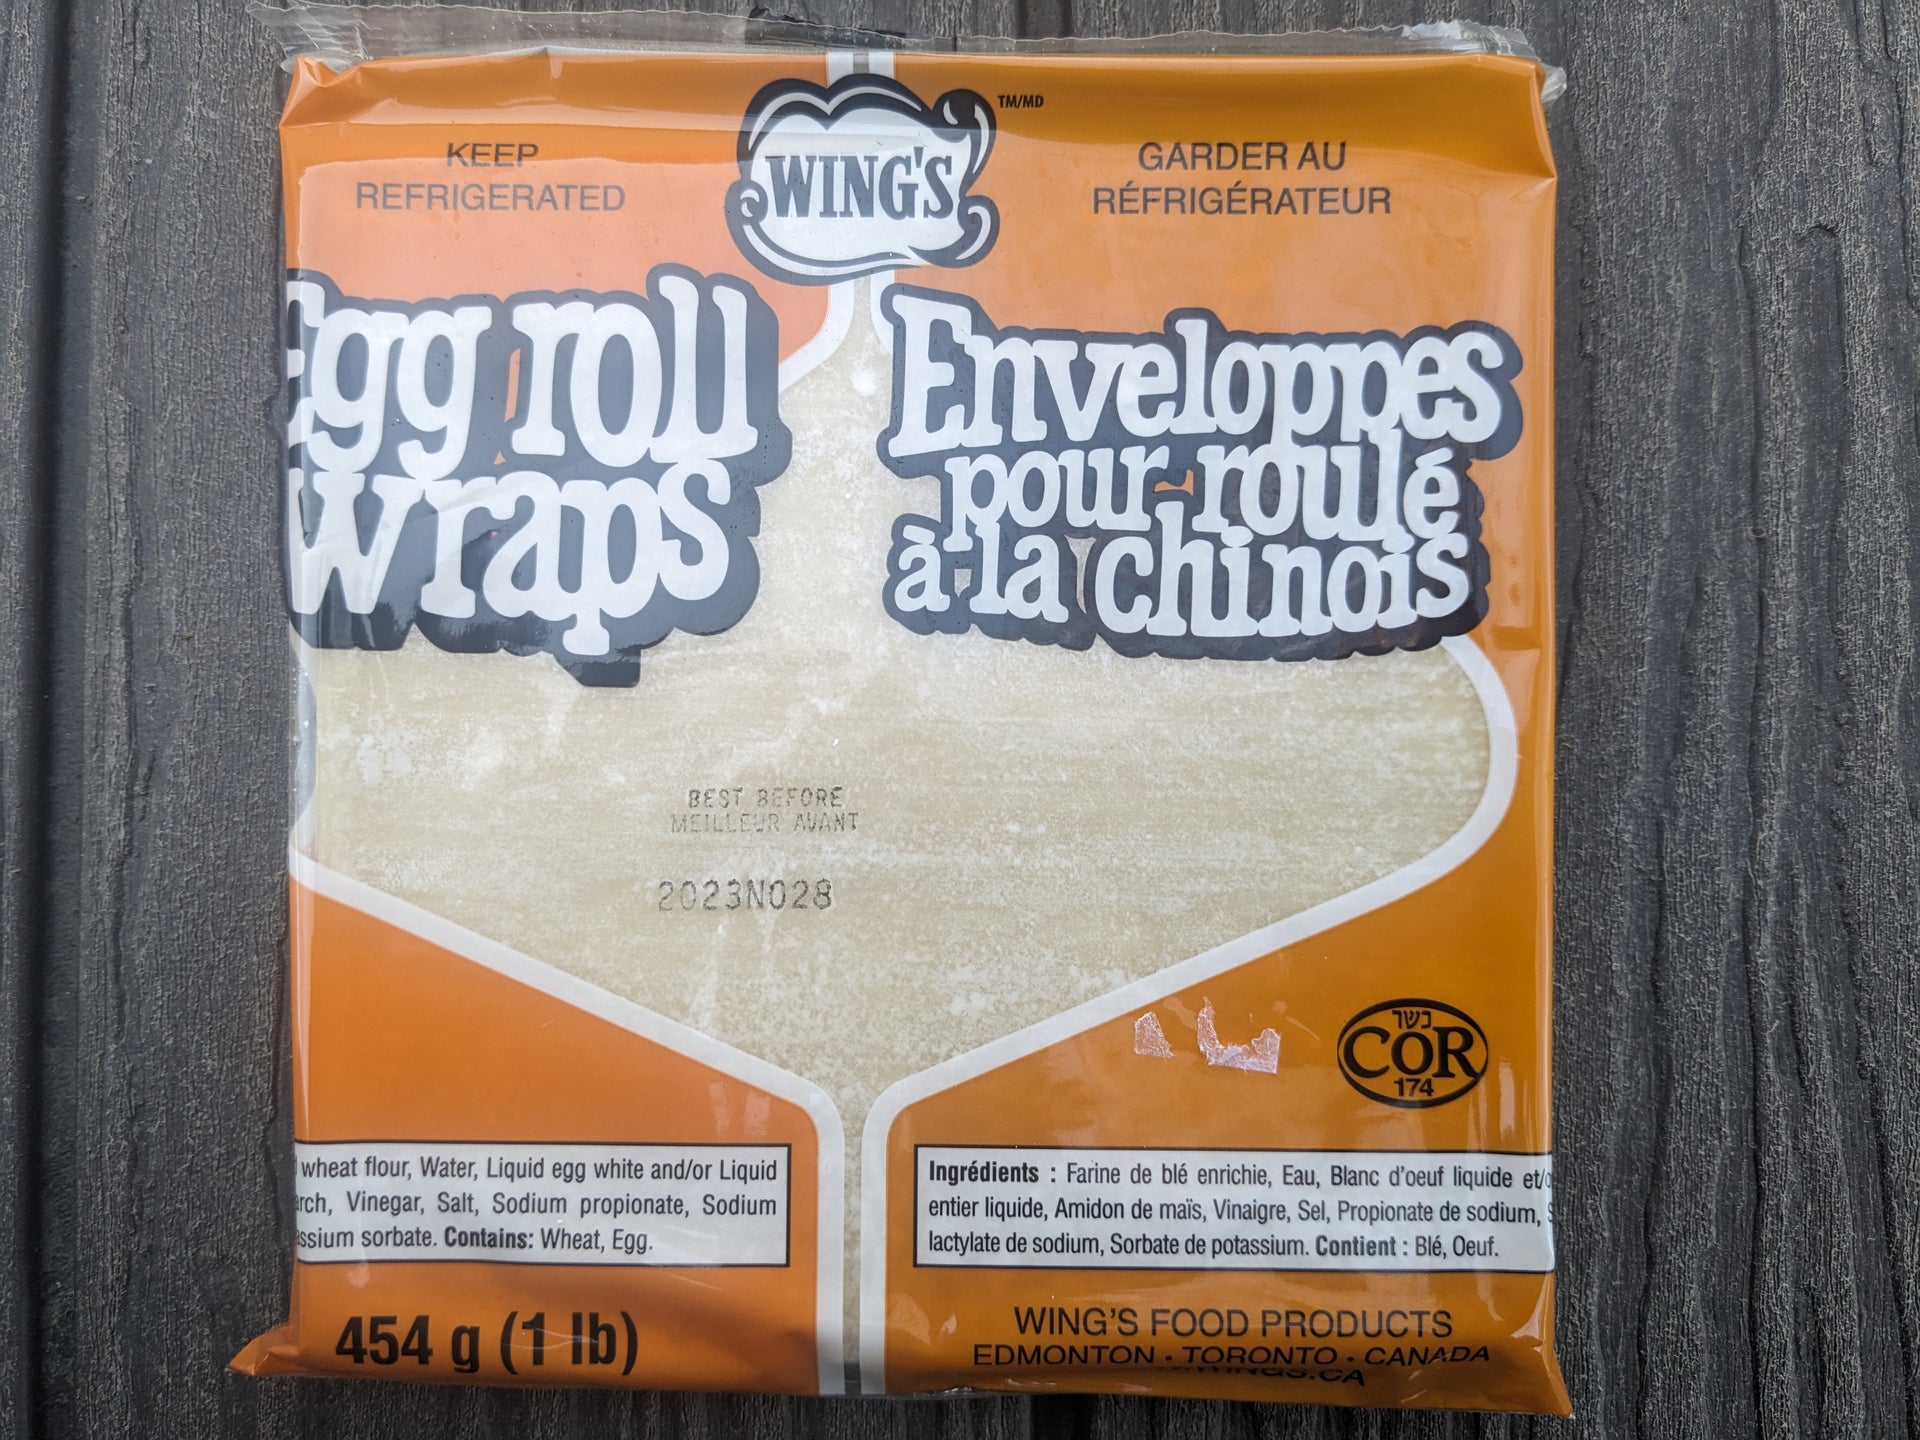 Wing's Egg Roll Wraps - 454 g